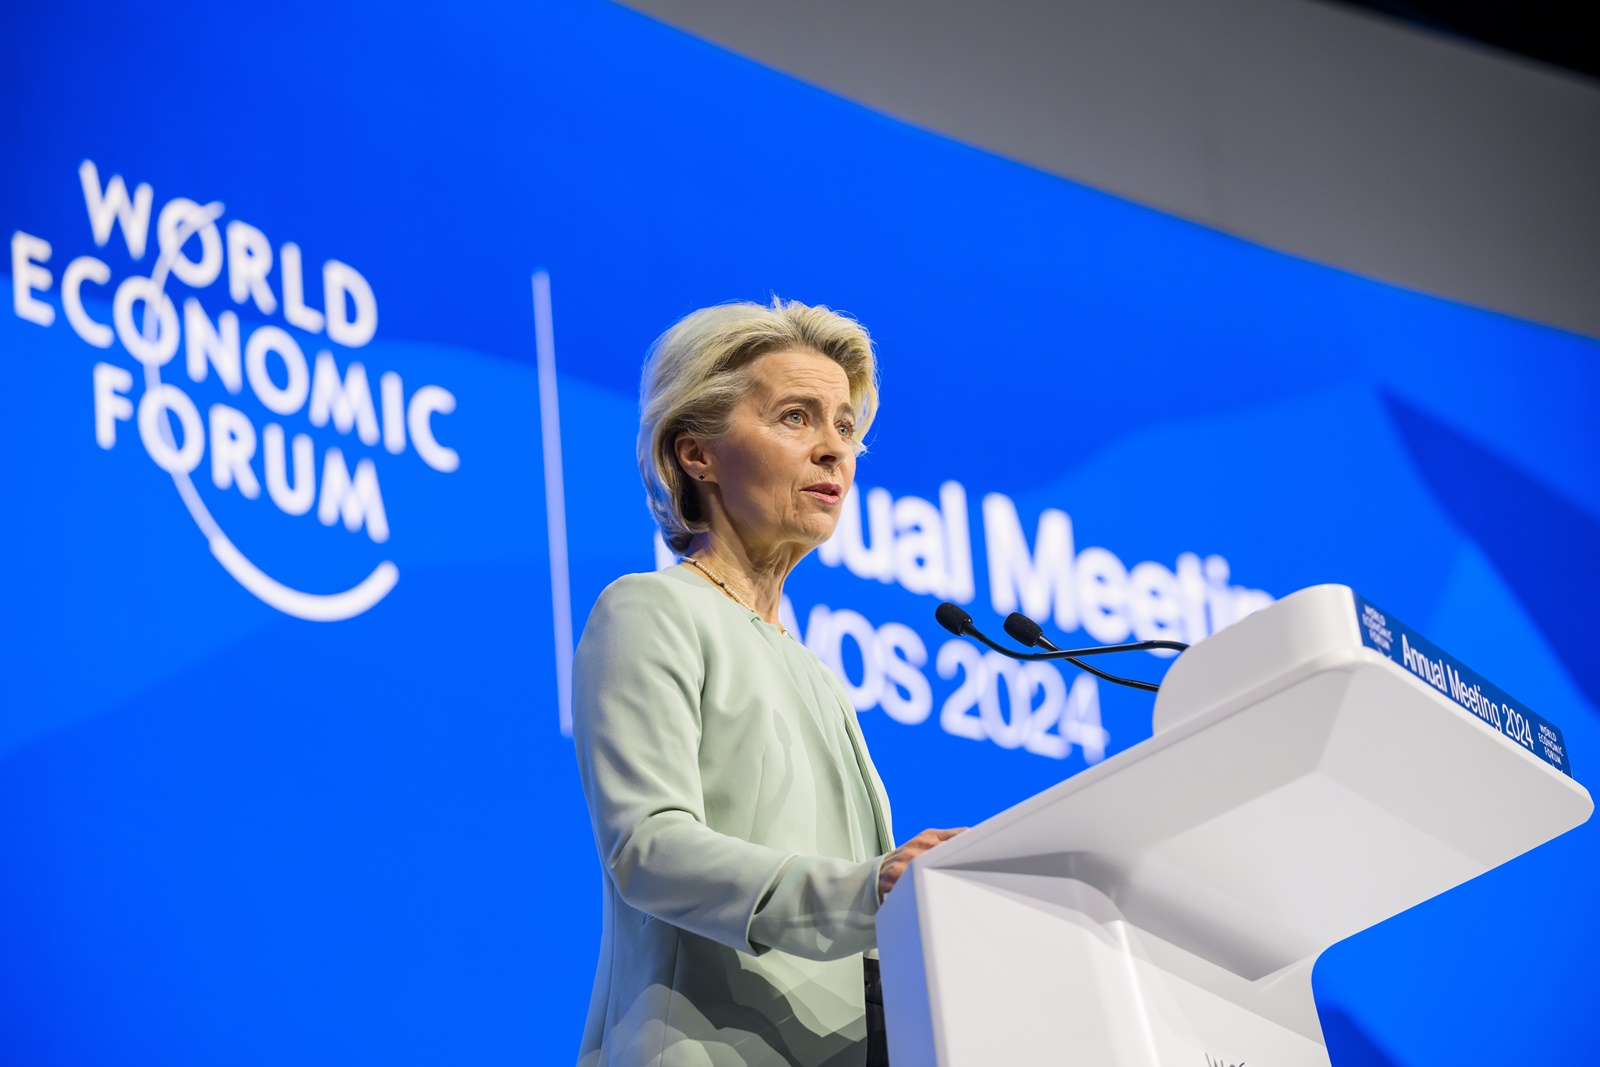 epa11082197 Ursula von der Leyen, President of the European Commission, speaks during a plenary session in the Congress Hall at the 54th annual meeting of the World Economic Forum (WEF) in Davos, Switzerland, 16 January 2024. The meeting brings together entrepreneurs, scientists, corporate and political leaders in Davos under the topic 'Rebuilding Trust' from 15 to 19 January.  EPA/GIAN EHRENZELLER